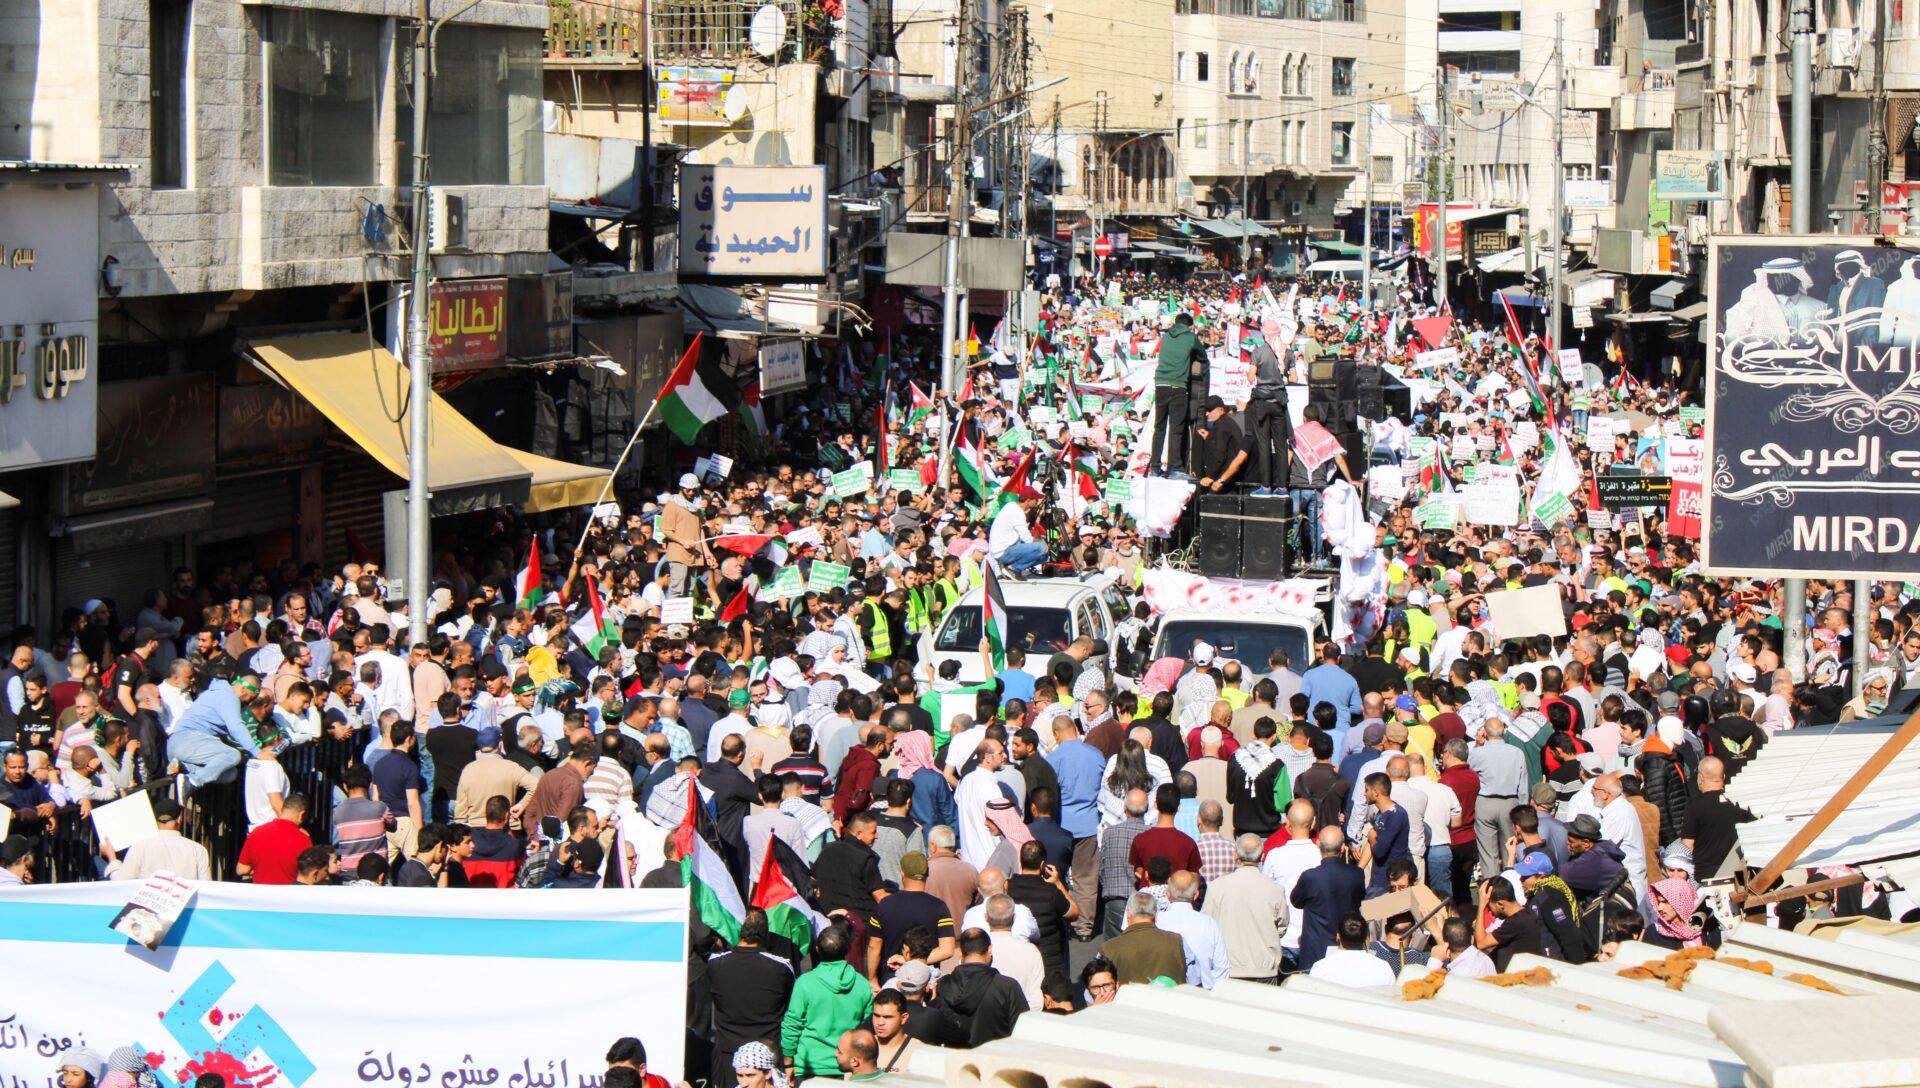 On Friday, Nov. 17, thousands rally in downtown Amman as public support for Hamas grows in Jordan. (Hanna Davis)